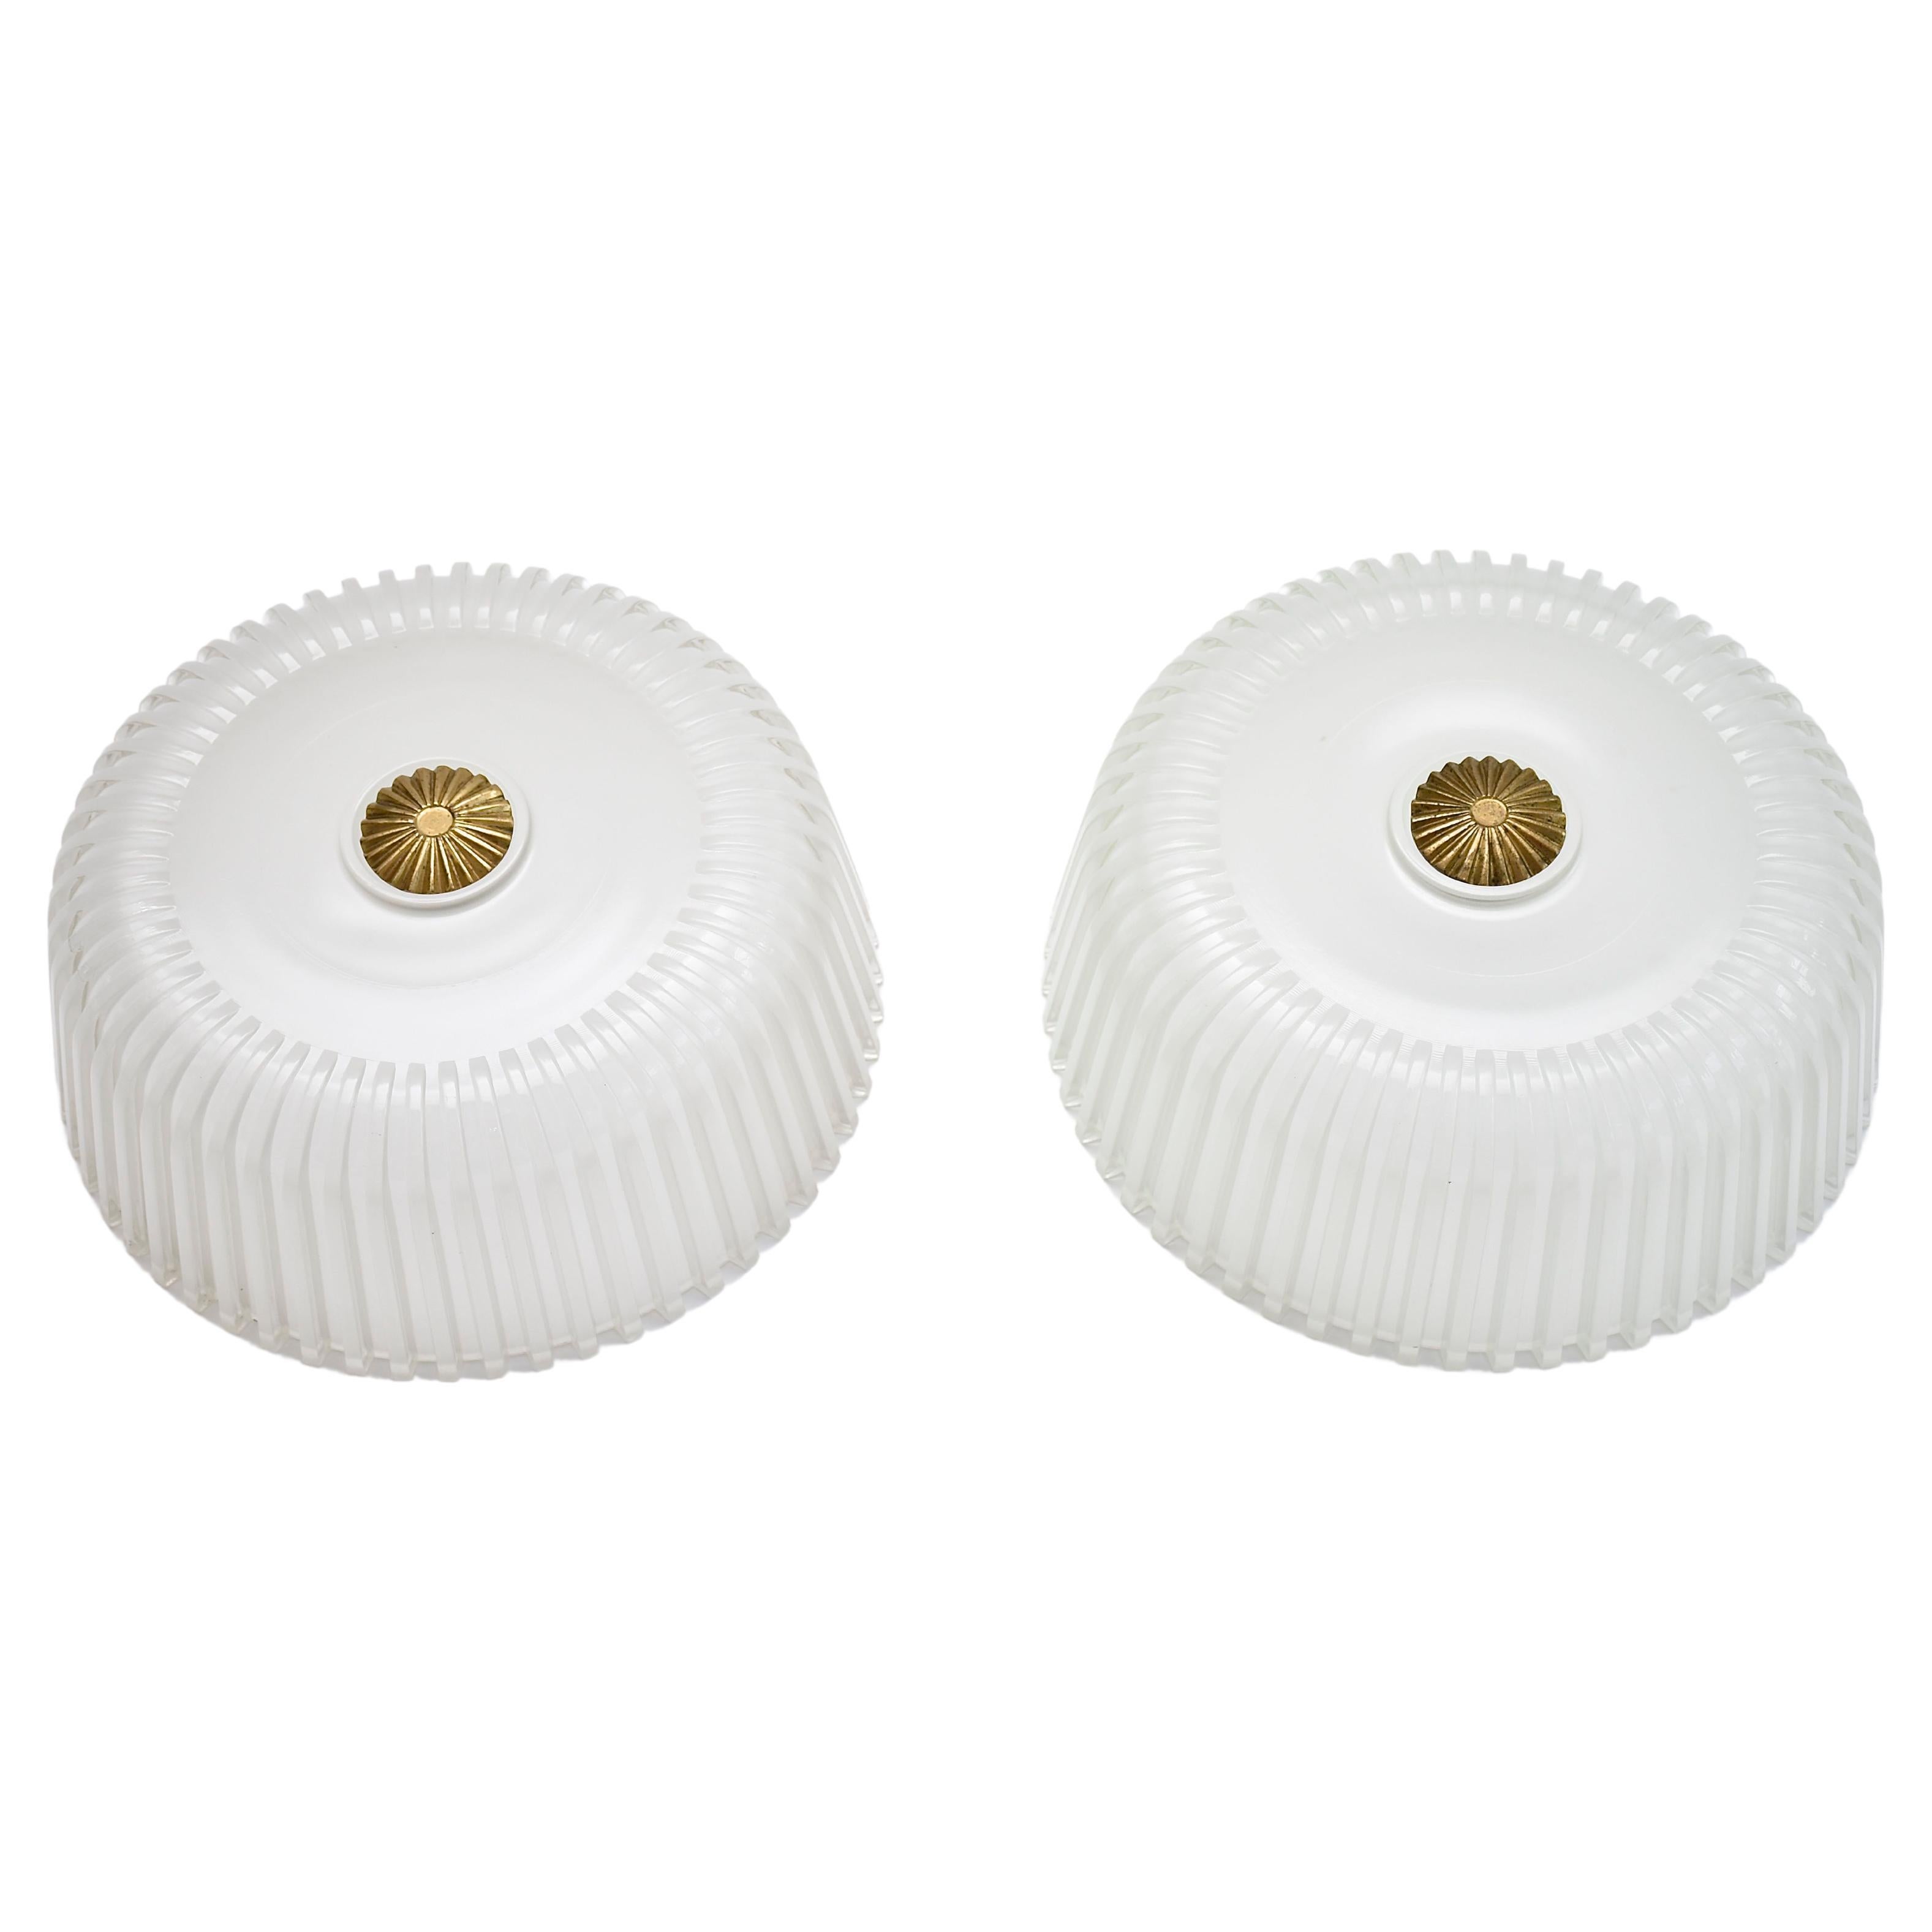 A pair of 2 ceiling fixtures or wall lights by Vistosi